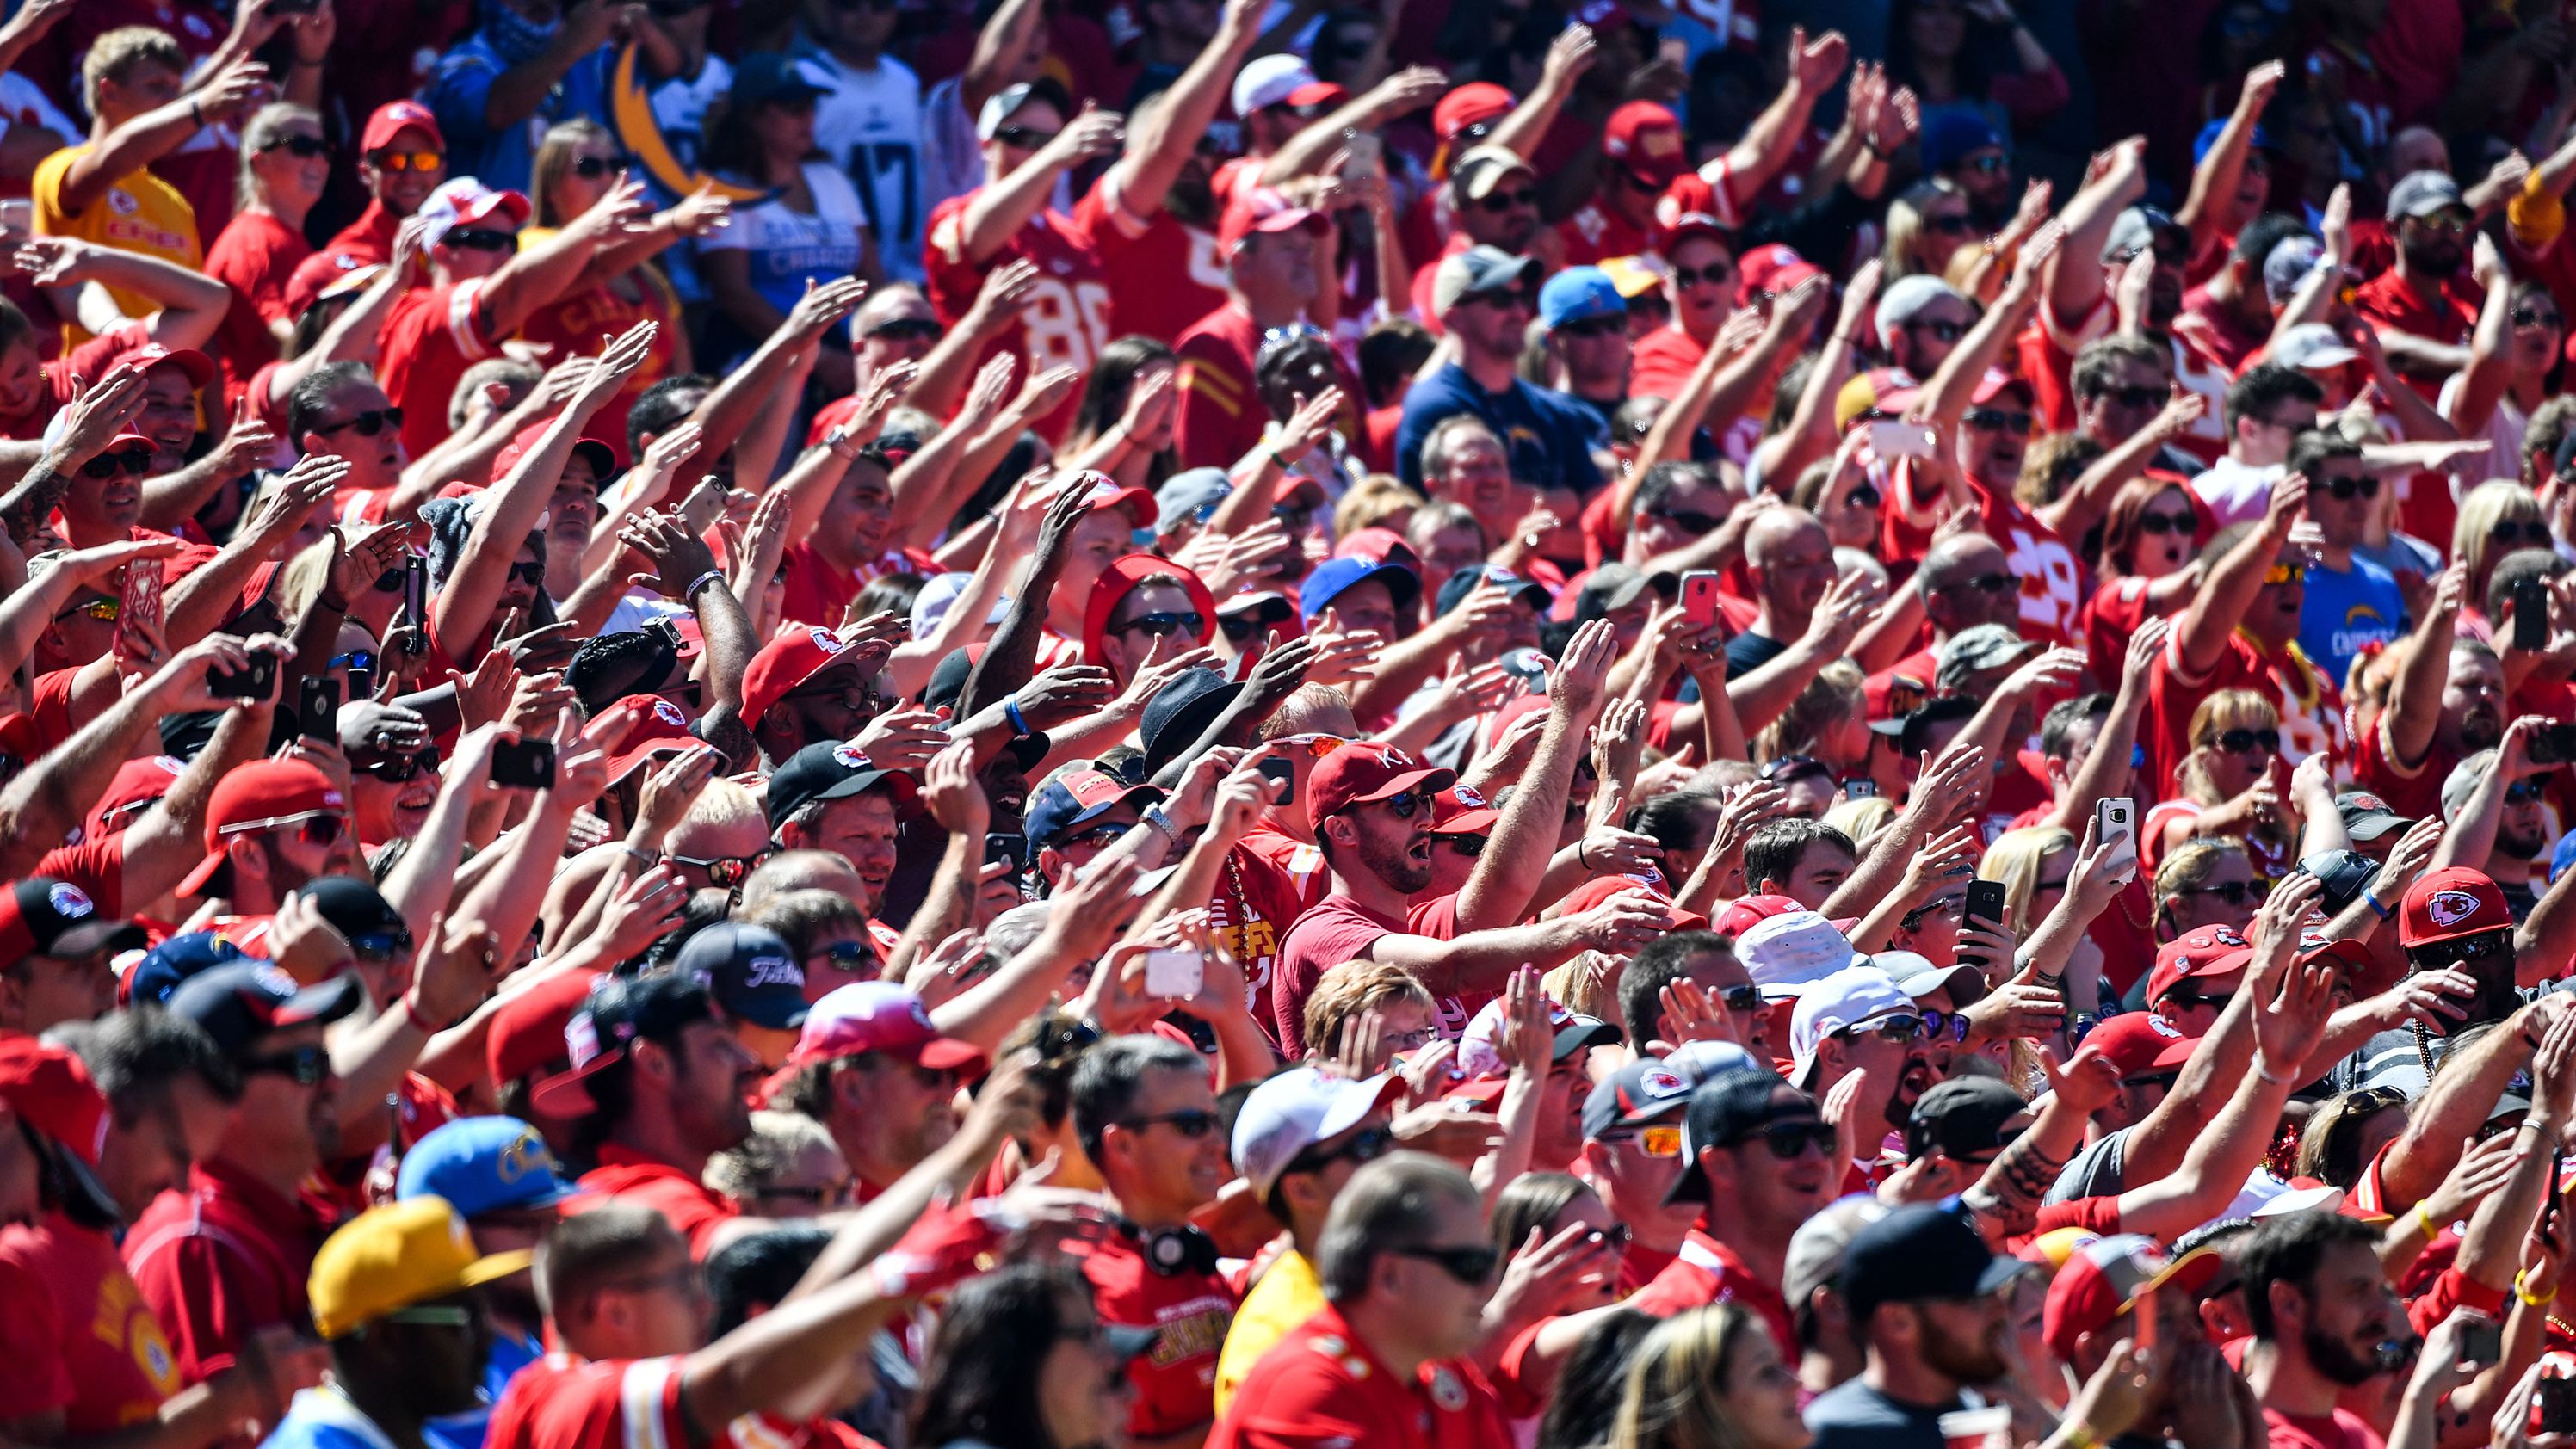 Kansas City Chiefs fans do the tomahawk chop before a game against the San Diego Chargers.